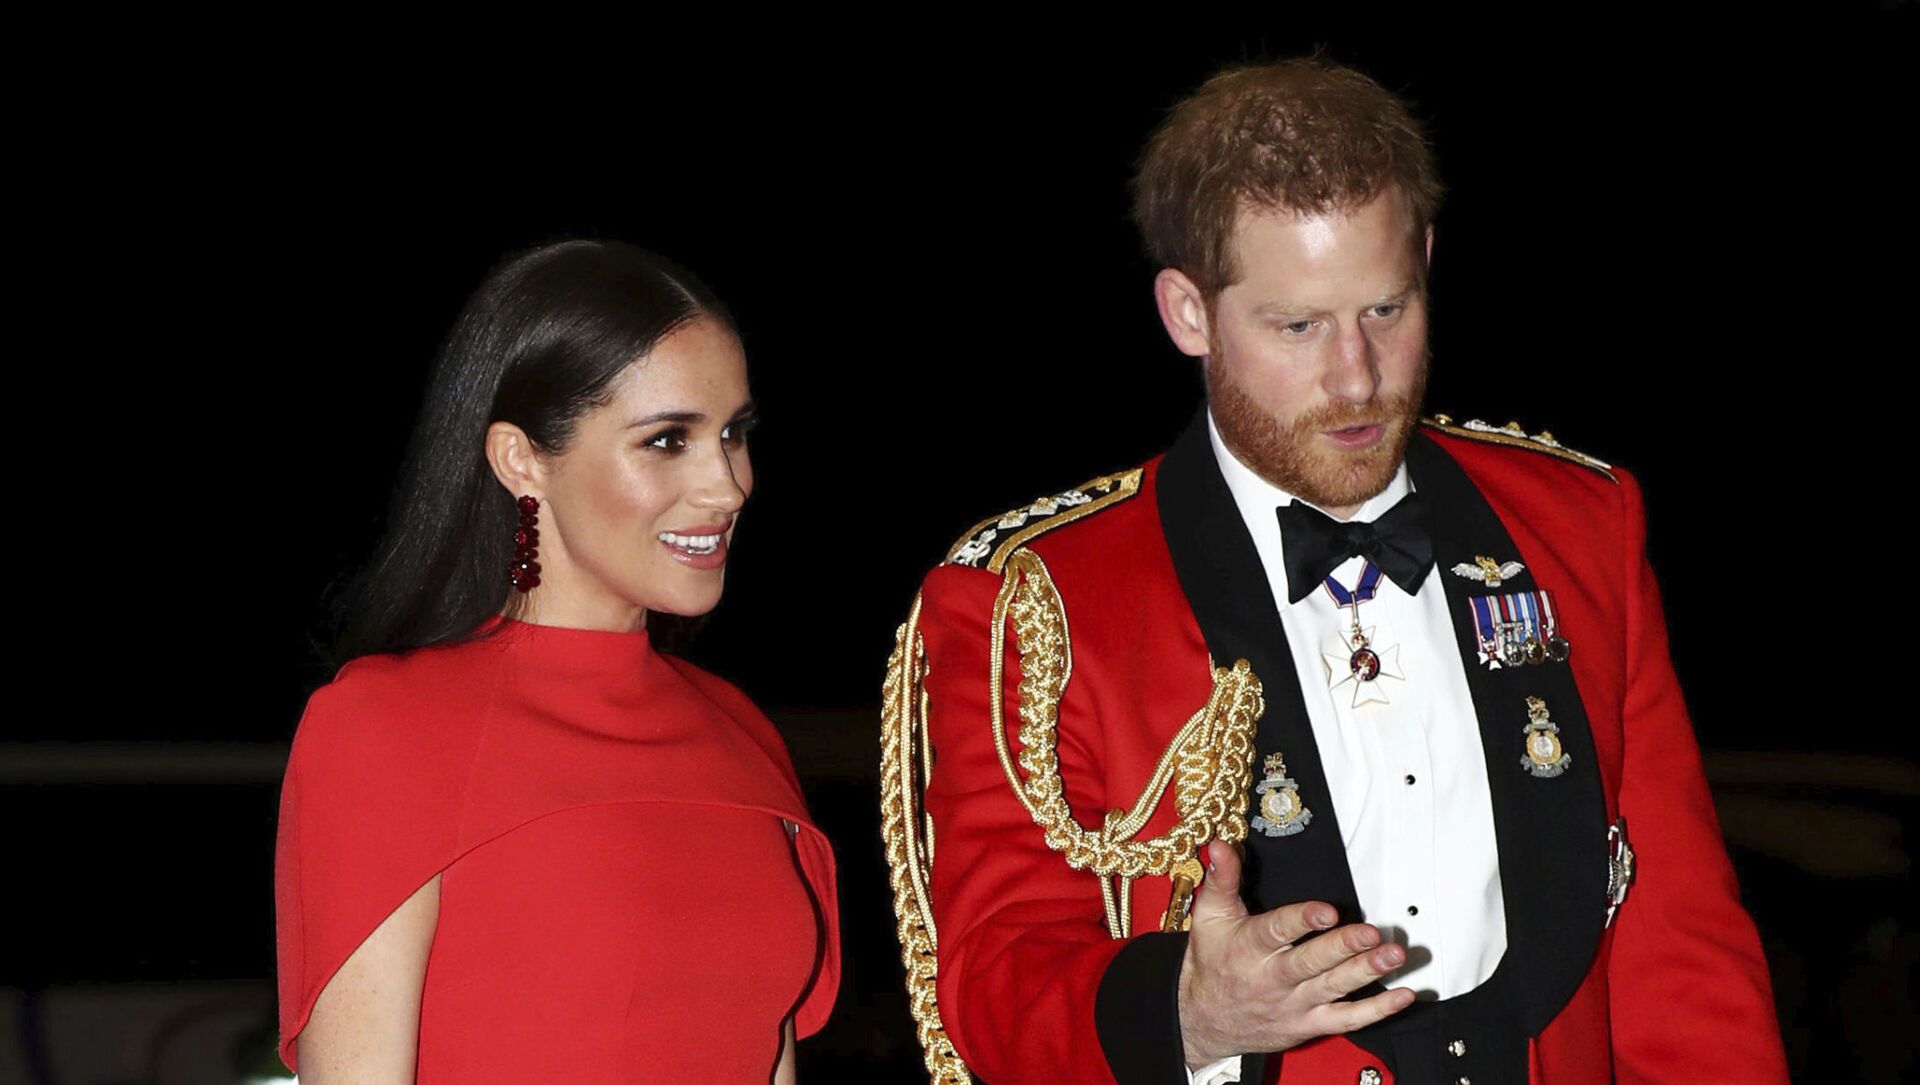 Britain's Prince Harry and Meghan, Duchess of Sussex arrive at the Royal Albert Hall in London, Saturday March 7, 2020, to attend the Mountbatten Festival of Music - Sputnik International, 1920, 16.02.2021